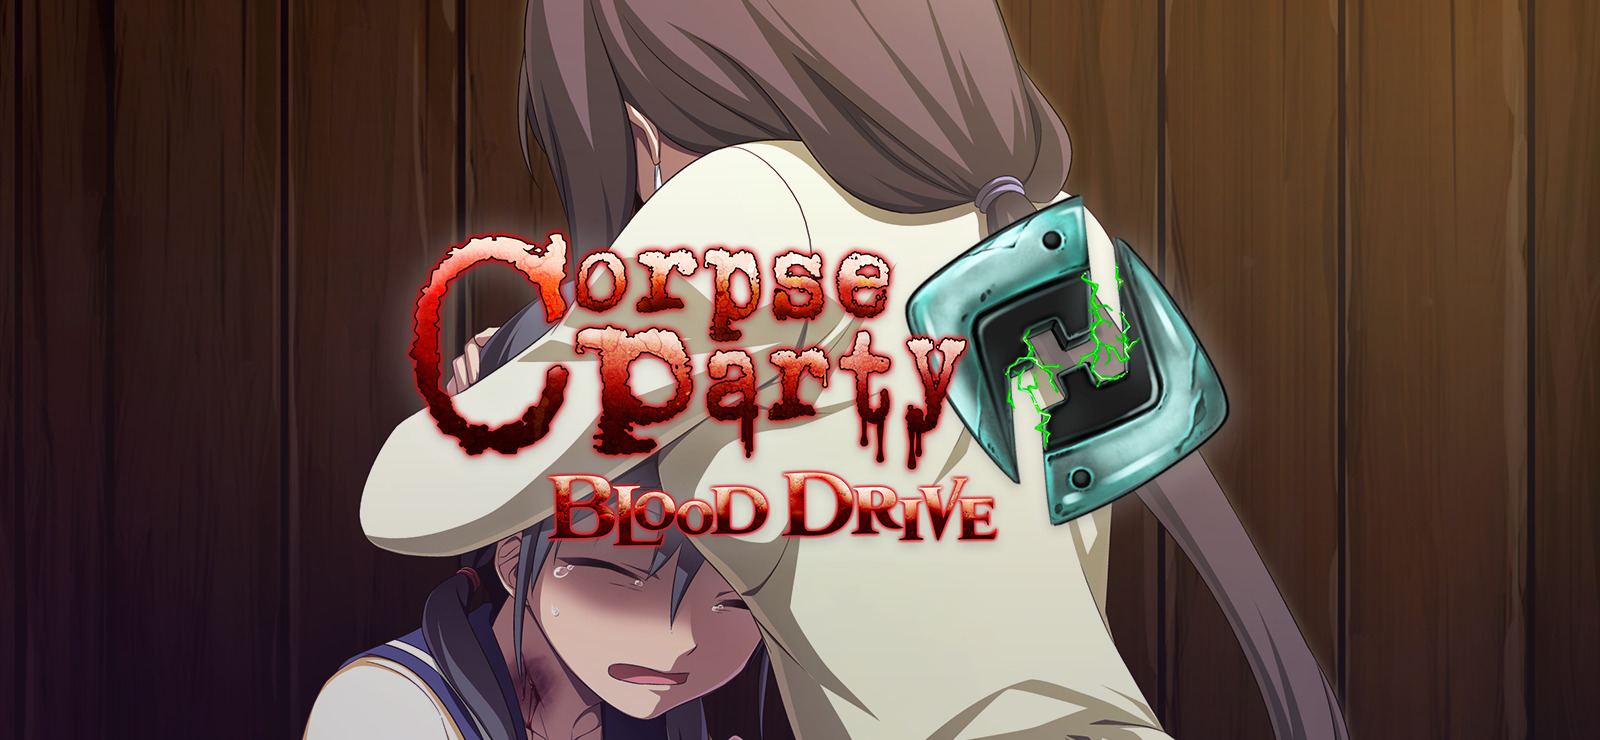 Corpse Party Blood Drive Chapter 3 Walkthrough